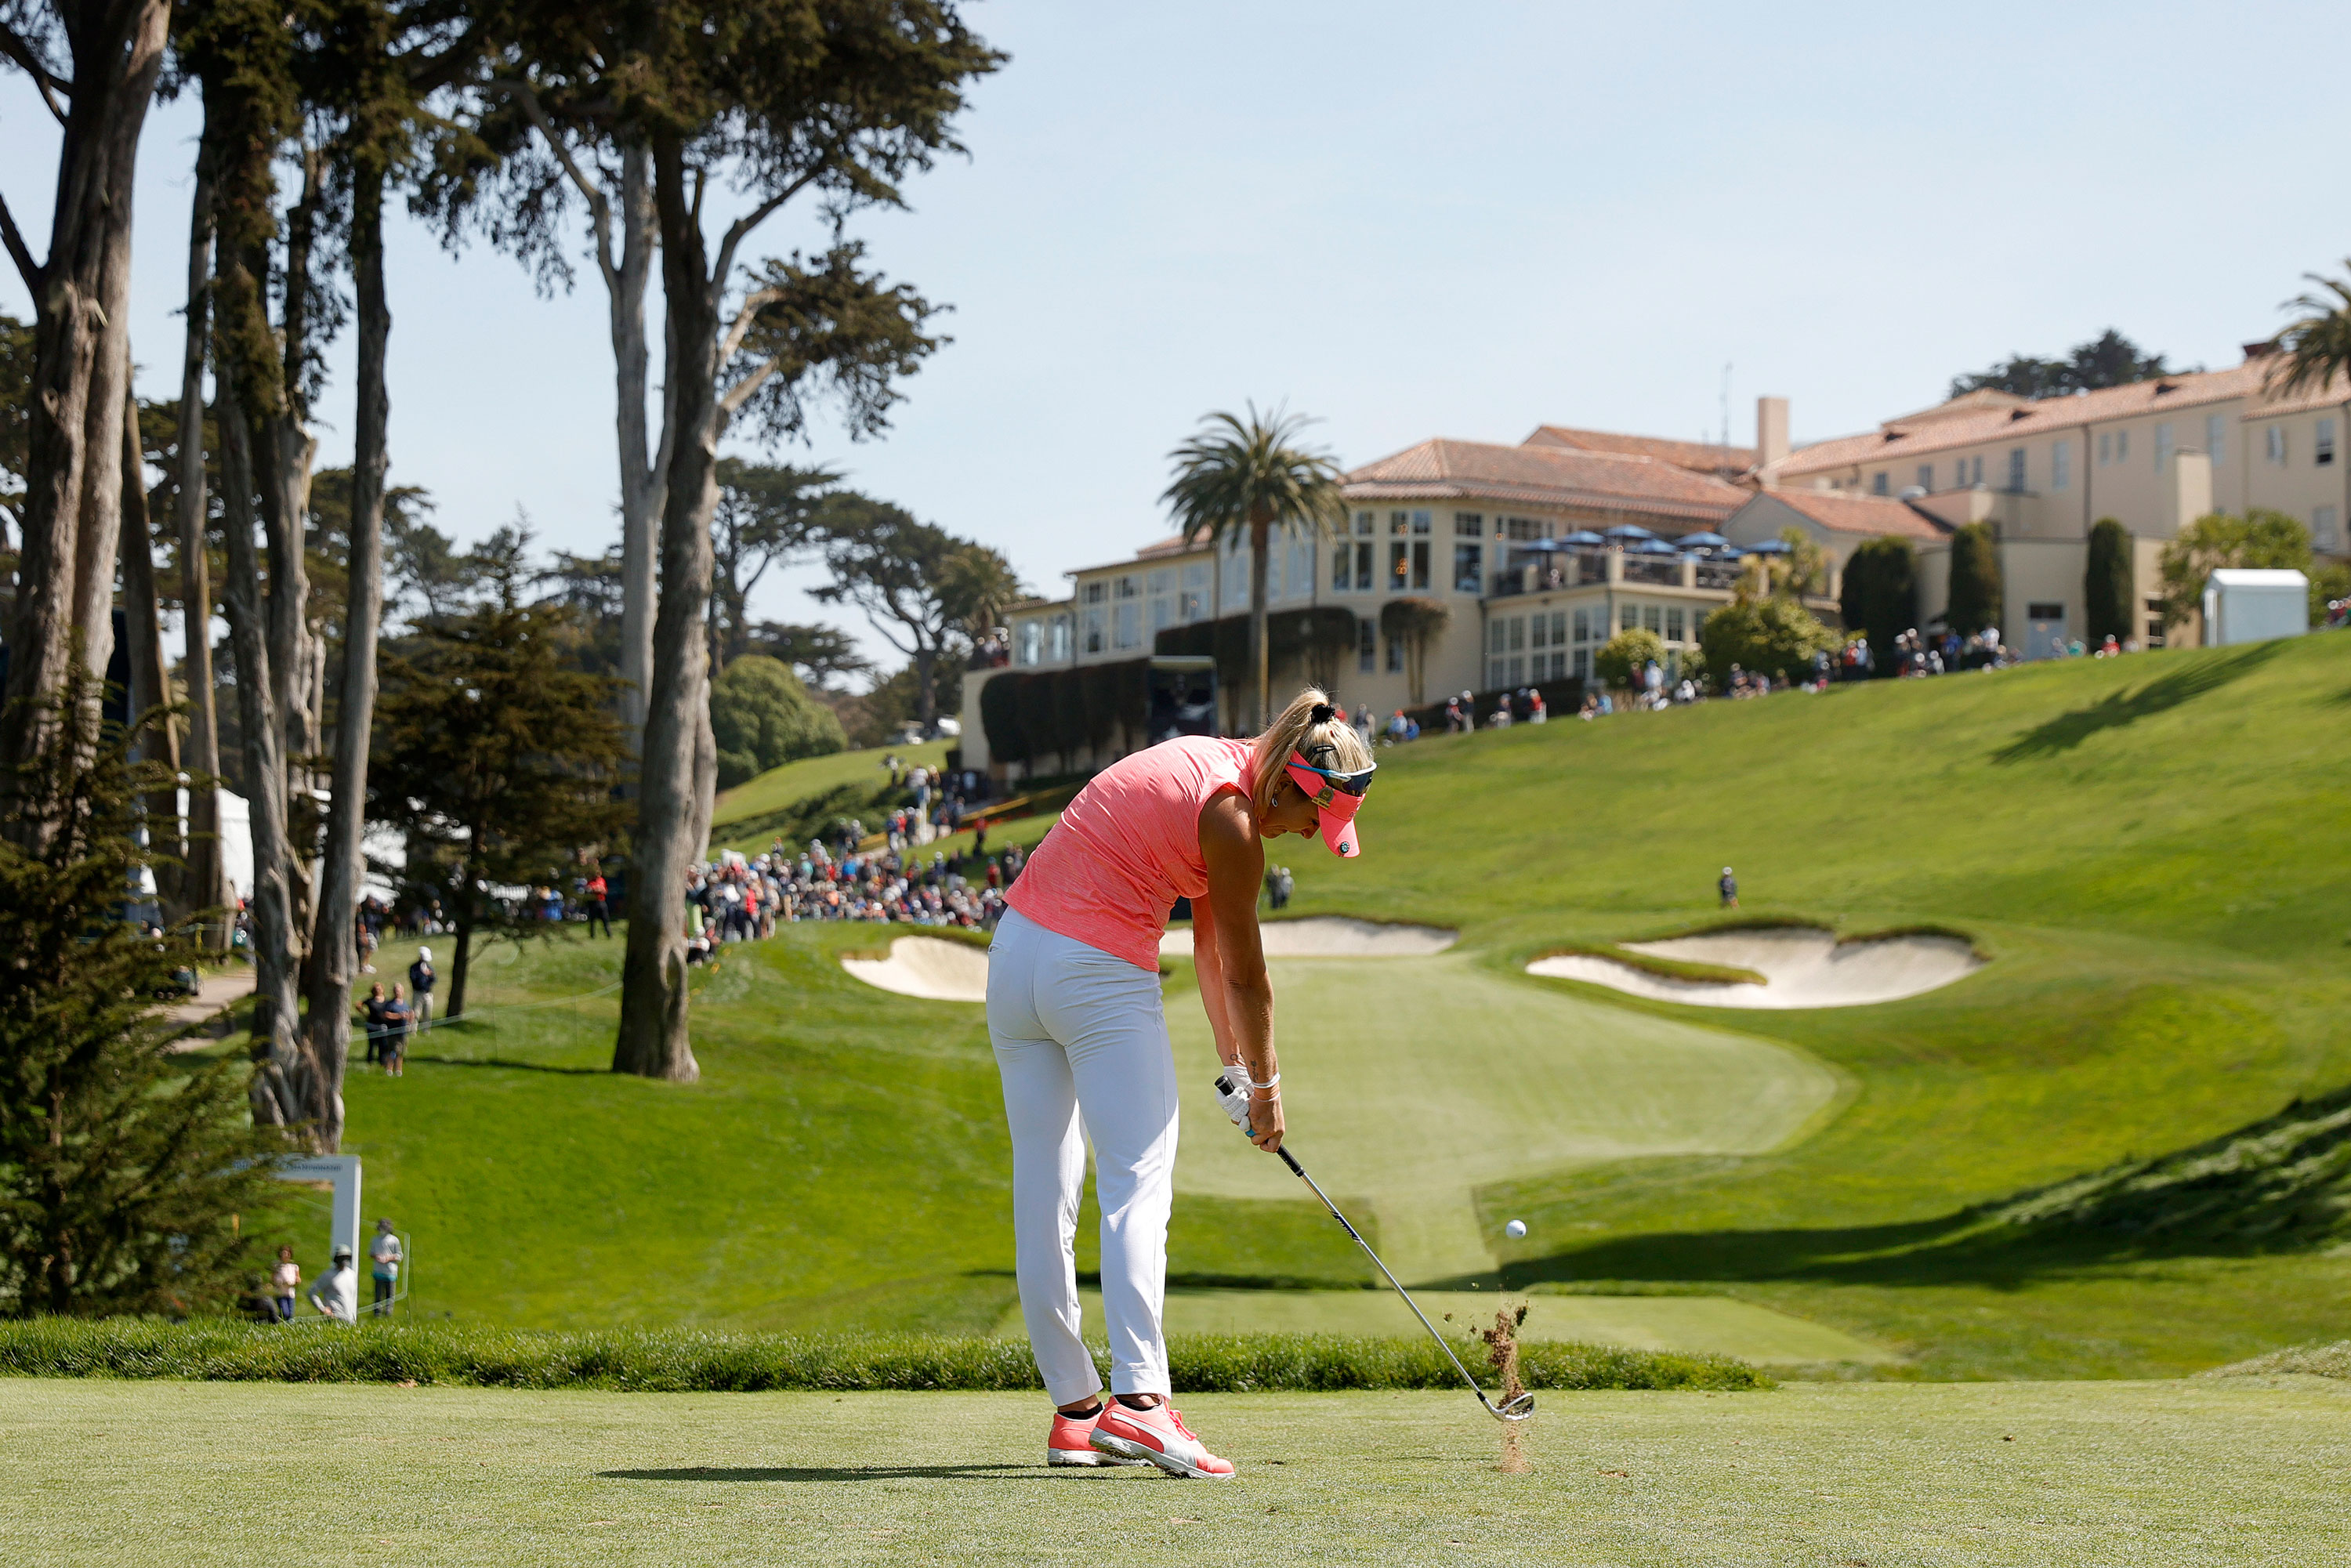 . Women's Open 2021: Late tweaks to course setup allow Olympic Club to  challenge but not embarrass top players | Golf News and Tour Information |  